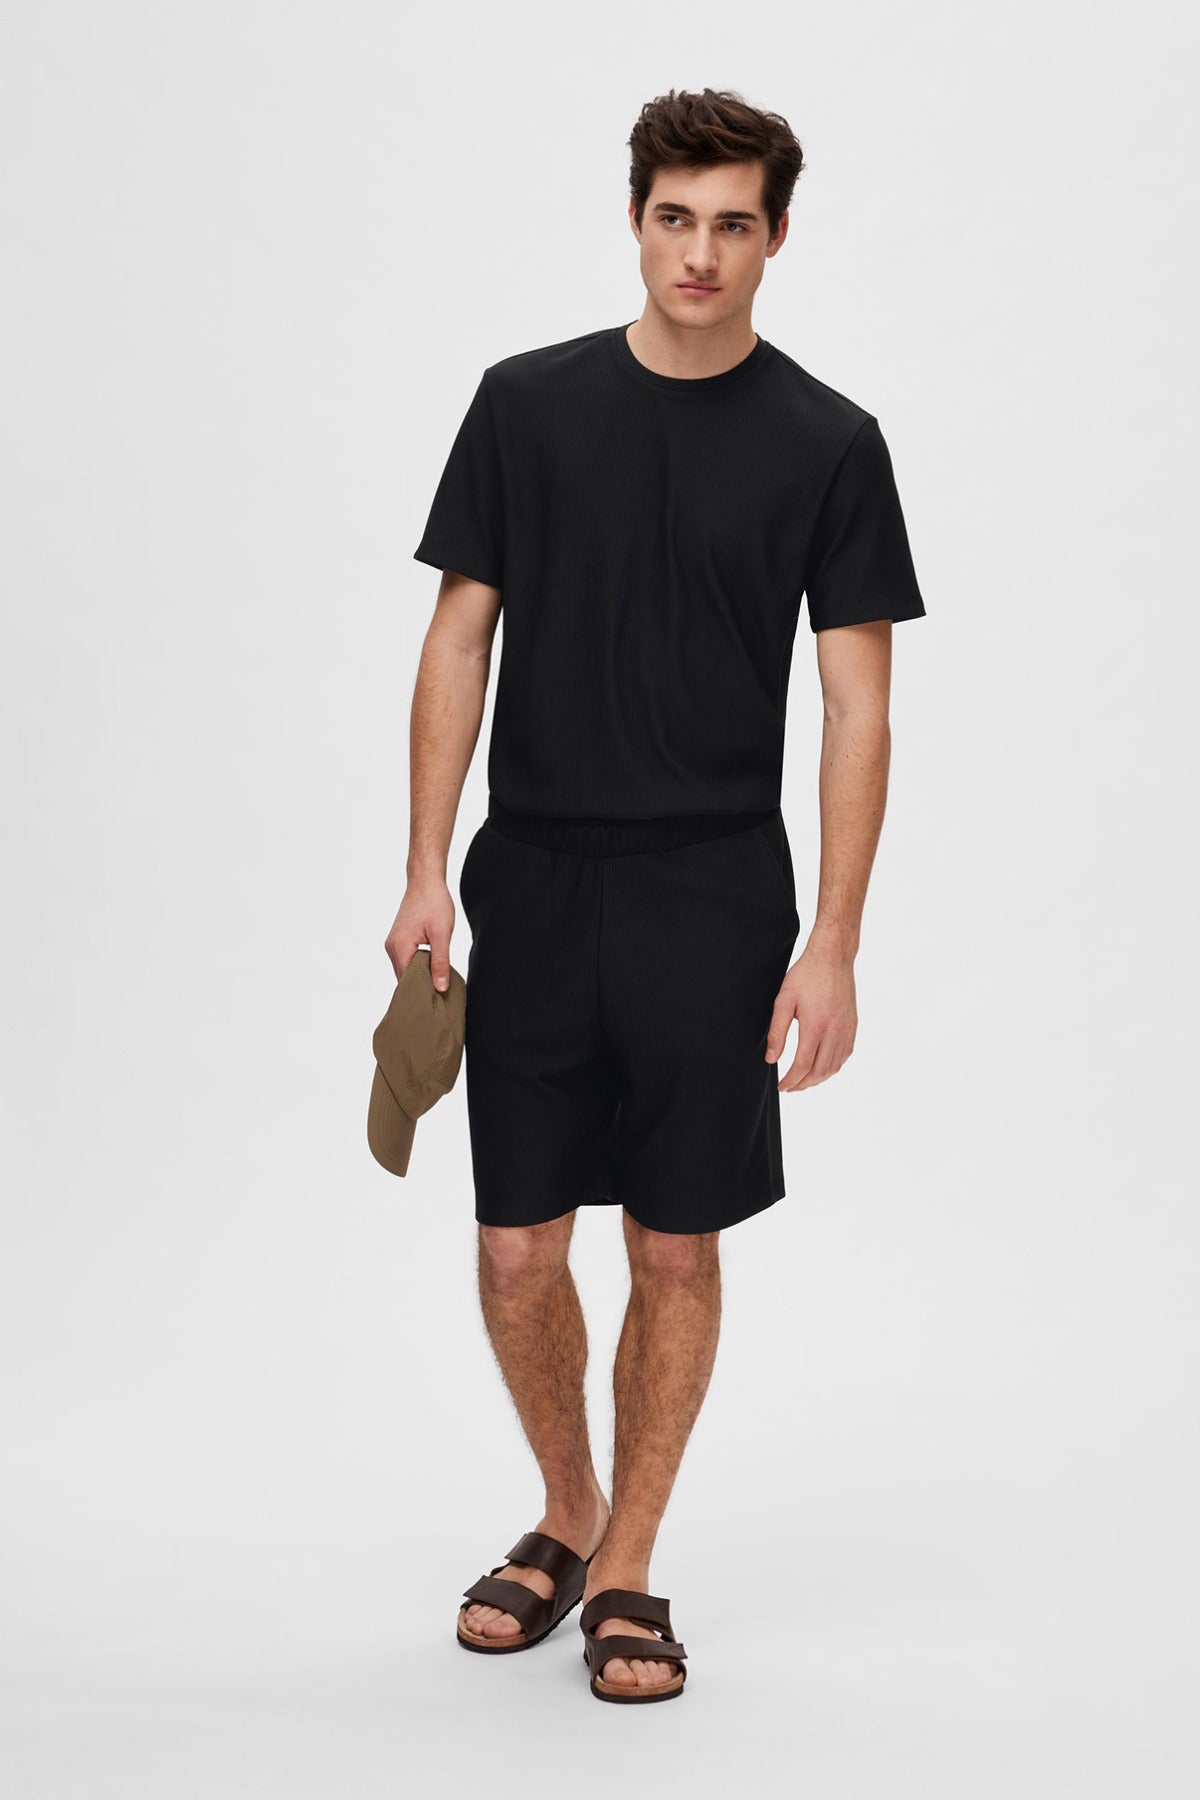 SELECTED HOMME Shorts Plisse